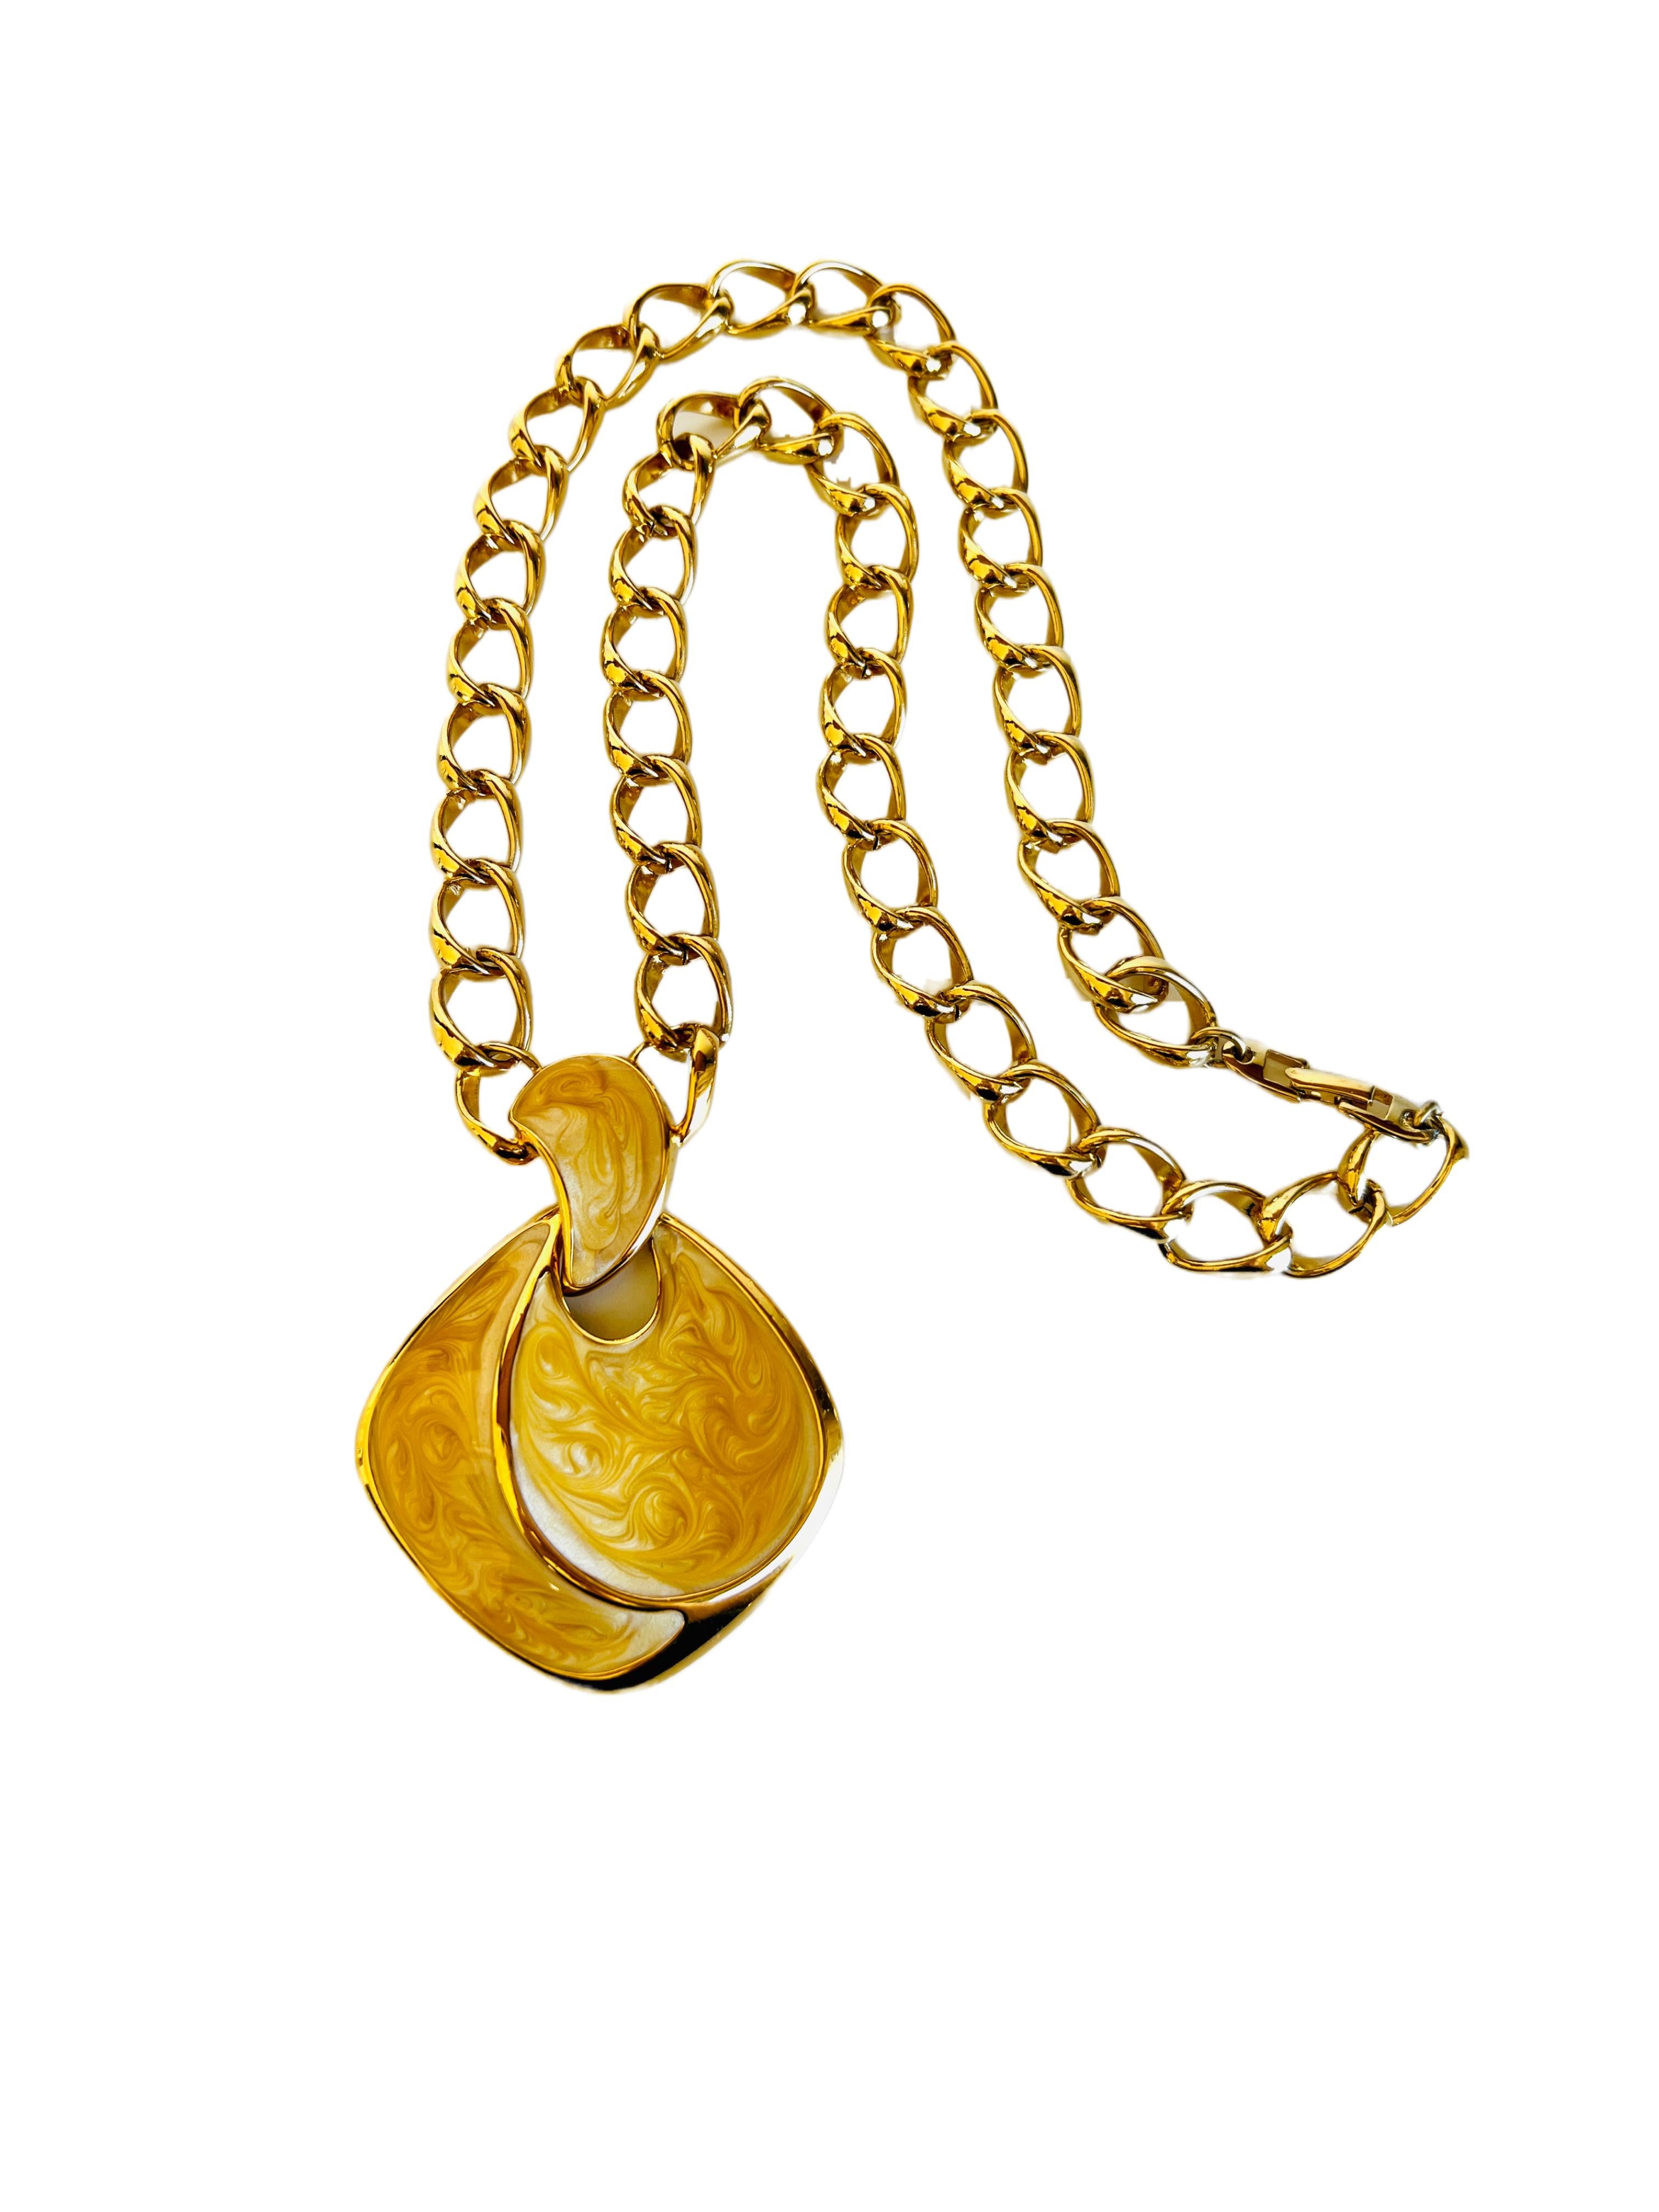 Napier Swirled Enamel Chunky Gold Chain Link Statement Necklace (Collier à maillons en or) en vente 7